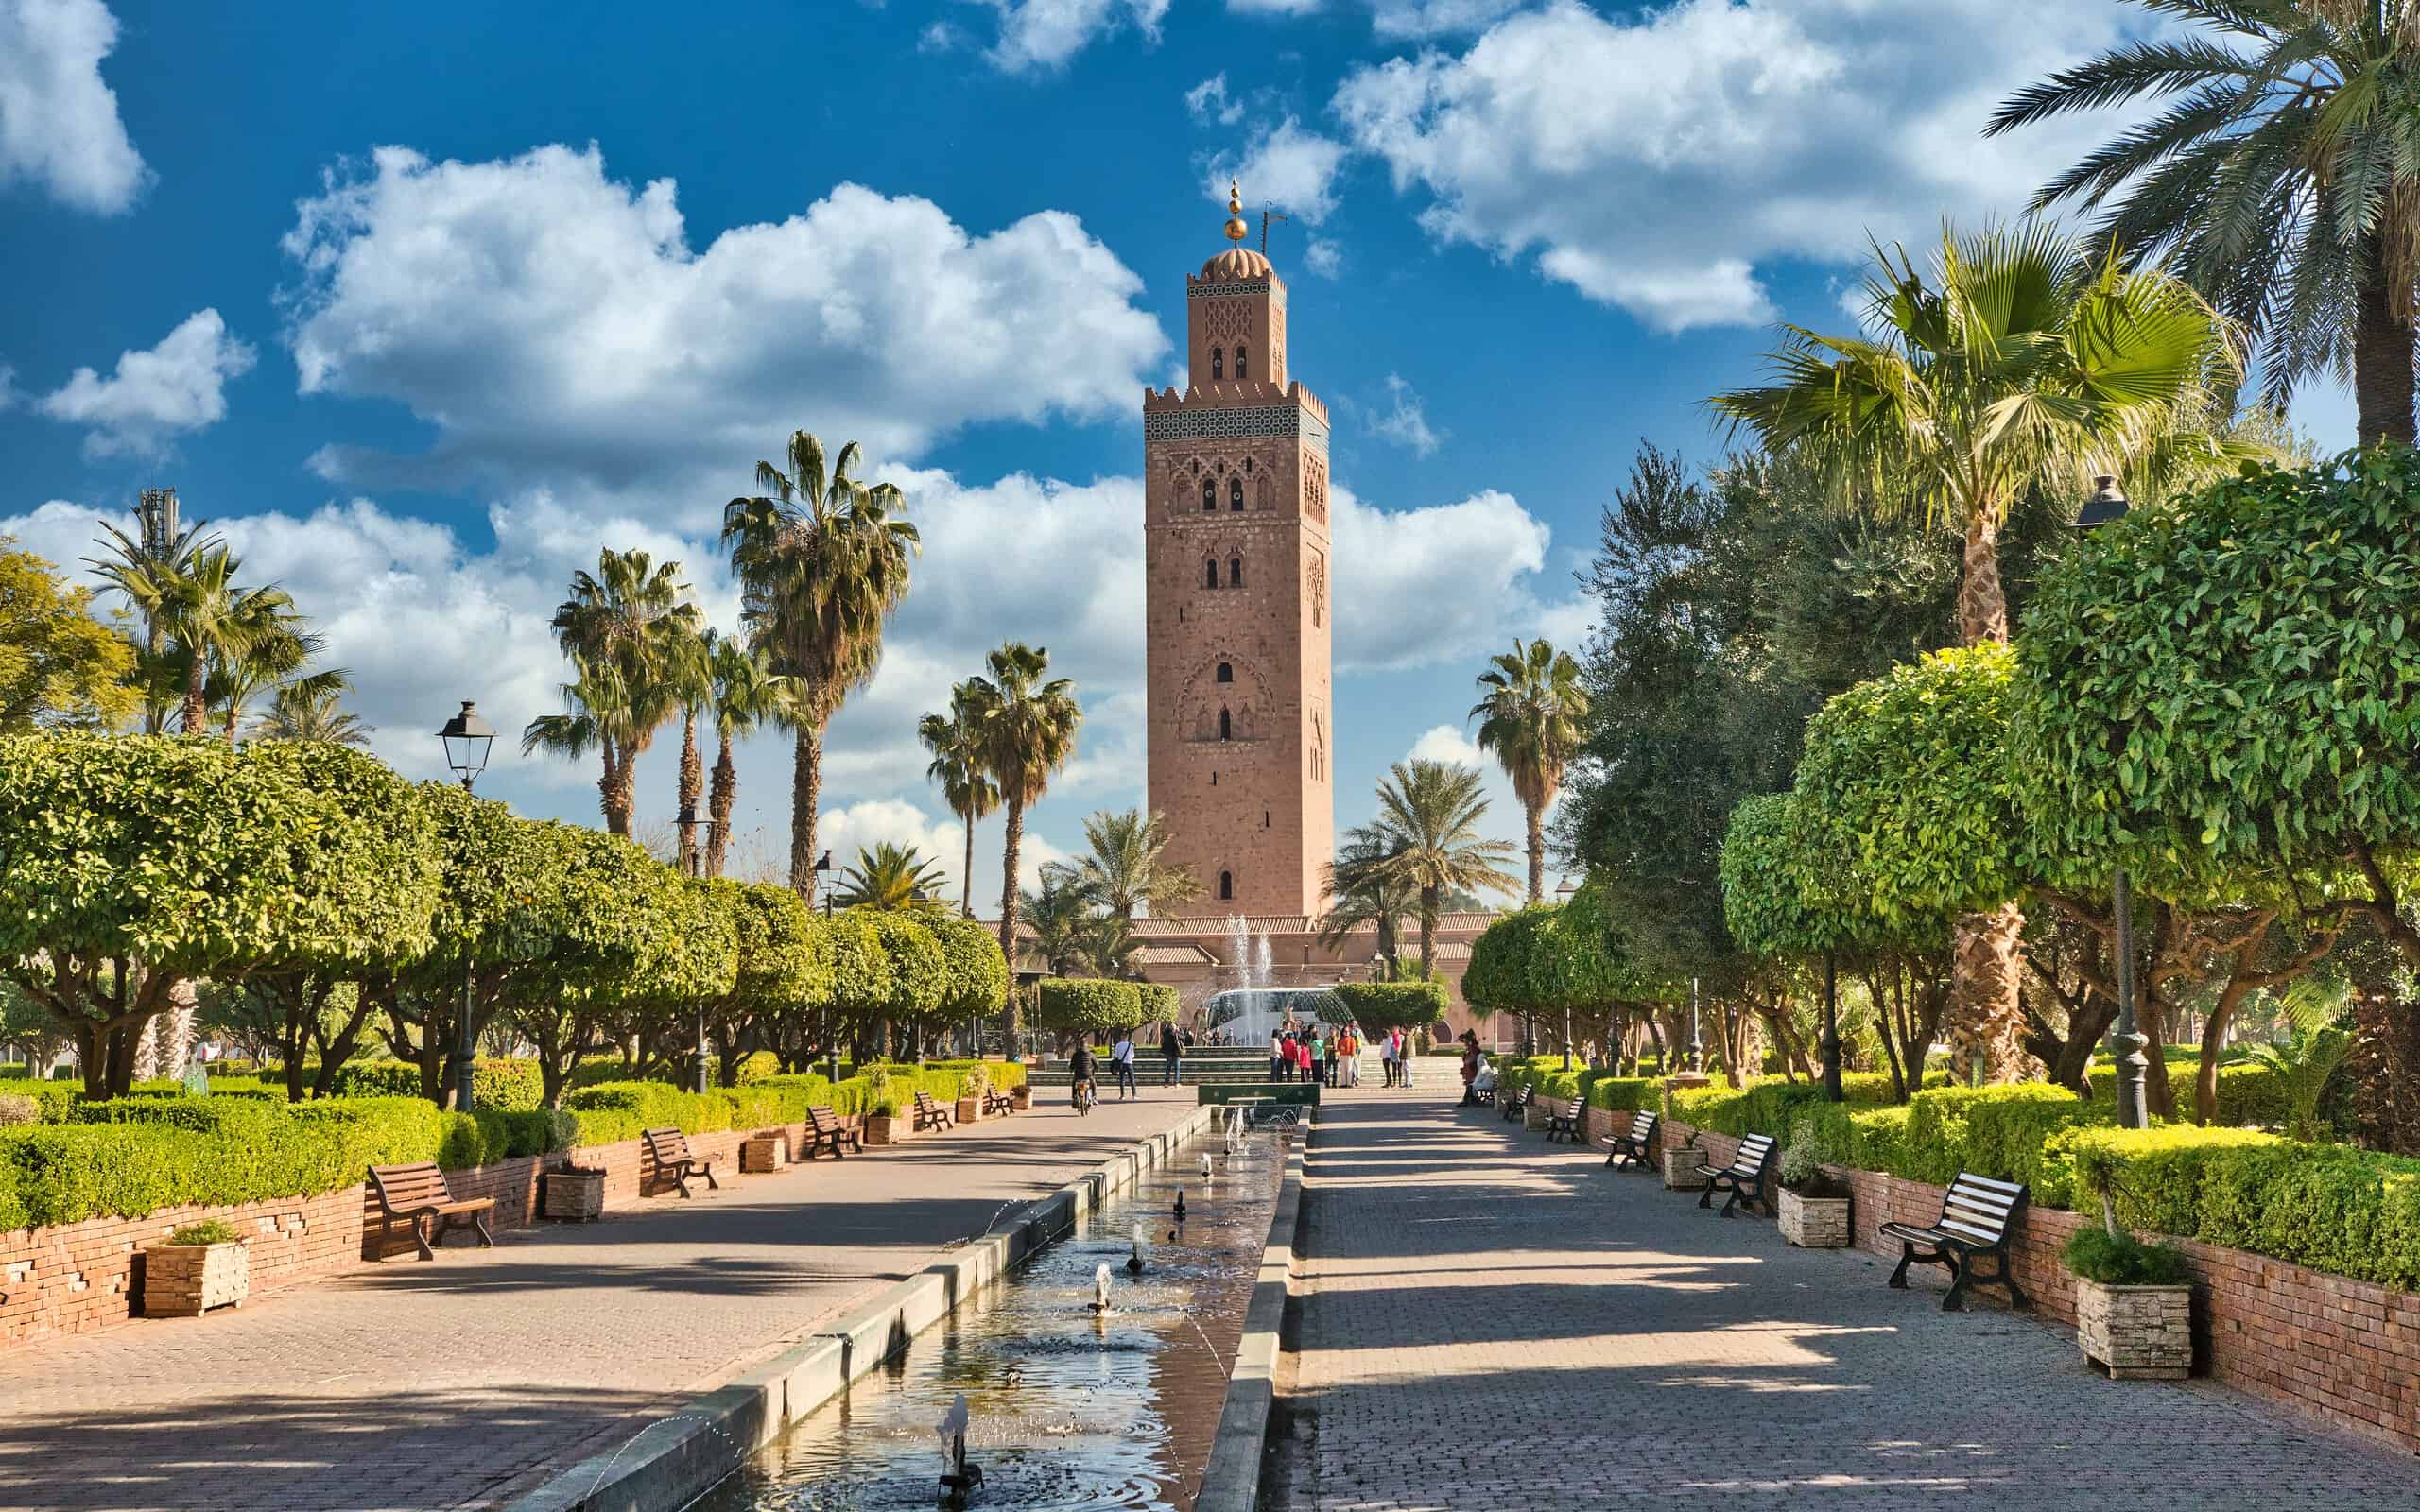 <p>With over 2 million visitors, Marrakech is one of Africa's top five most visited cities. Located in <a href="https://a-z-animals.com/animals/location/africa/morocco/?utm_campaign=msn&utm_source=msn_slideshow&utm_content=1329527&utm_medium=in_content" rel="noopener">Morocco</a>, this city melds ancient architecture with modern luxuries. Some of the must-see sights include the Bahia Palace, Tombs of the Saadians, and Lalla Takerkoust.</p>    <p>The Bahia Palace was constructed in the mid to late nineteenth century. It is most noted for its exceptional decoration, featuring many indoor courtyards and riad gardens. This palace is breathtaking, from its ornamental vaulted ceilings to its zellij tile and marble flooring. The cedarwood ceilings adorned by painted floral patterns are especially noteworthy.</p>    <p>The Saadian Tombs are a historic royal necropolis that dates back to the early sixteenth century. The interior design and architecture of the structure are impressive. Many art historians regard this time period as the height of Moroccan architecture.</p>    <p>Finally, Lalla Takerkoust’s lake is a popular destination because of its incredibly clear water quality. This is due to the sandstone around the area, which filters out impurities from the water. There are also several ruins, including a medieval castle, to visit around the lake.</p>    <p>These are just a few of the attractions in Marrakech, making it one of Africa's most visited cities.</p><p>Sharks, lions, alligators, and more! Don’t miss today’s latest and most exciting animal news. <strong><a href="https://www.msn.com/en-us/channel/source/AZ%20Animals%20US/sr-vid-7etr9q8xun6k6508c3nufaum0de3dqktiq6h27ddeagnfug30wka">Click here to access the A-Z Animals profile page</a> and be sure to hit the <em>Follow</em> button here or at the top of this article! </strong></p> <p>Have feedback? Add a comment below!</p>